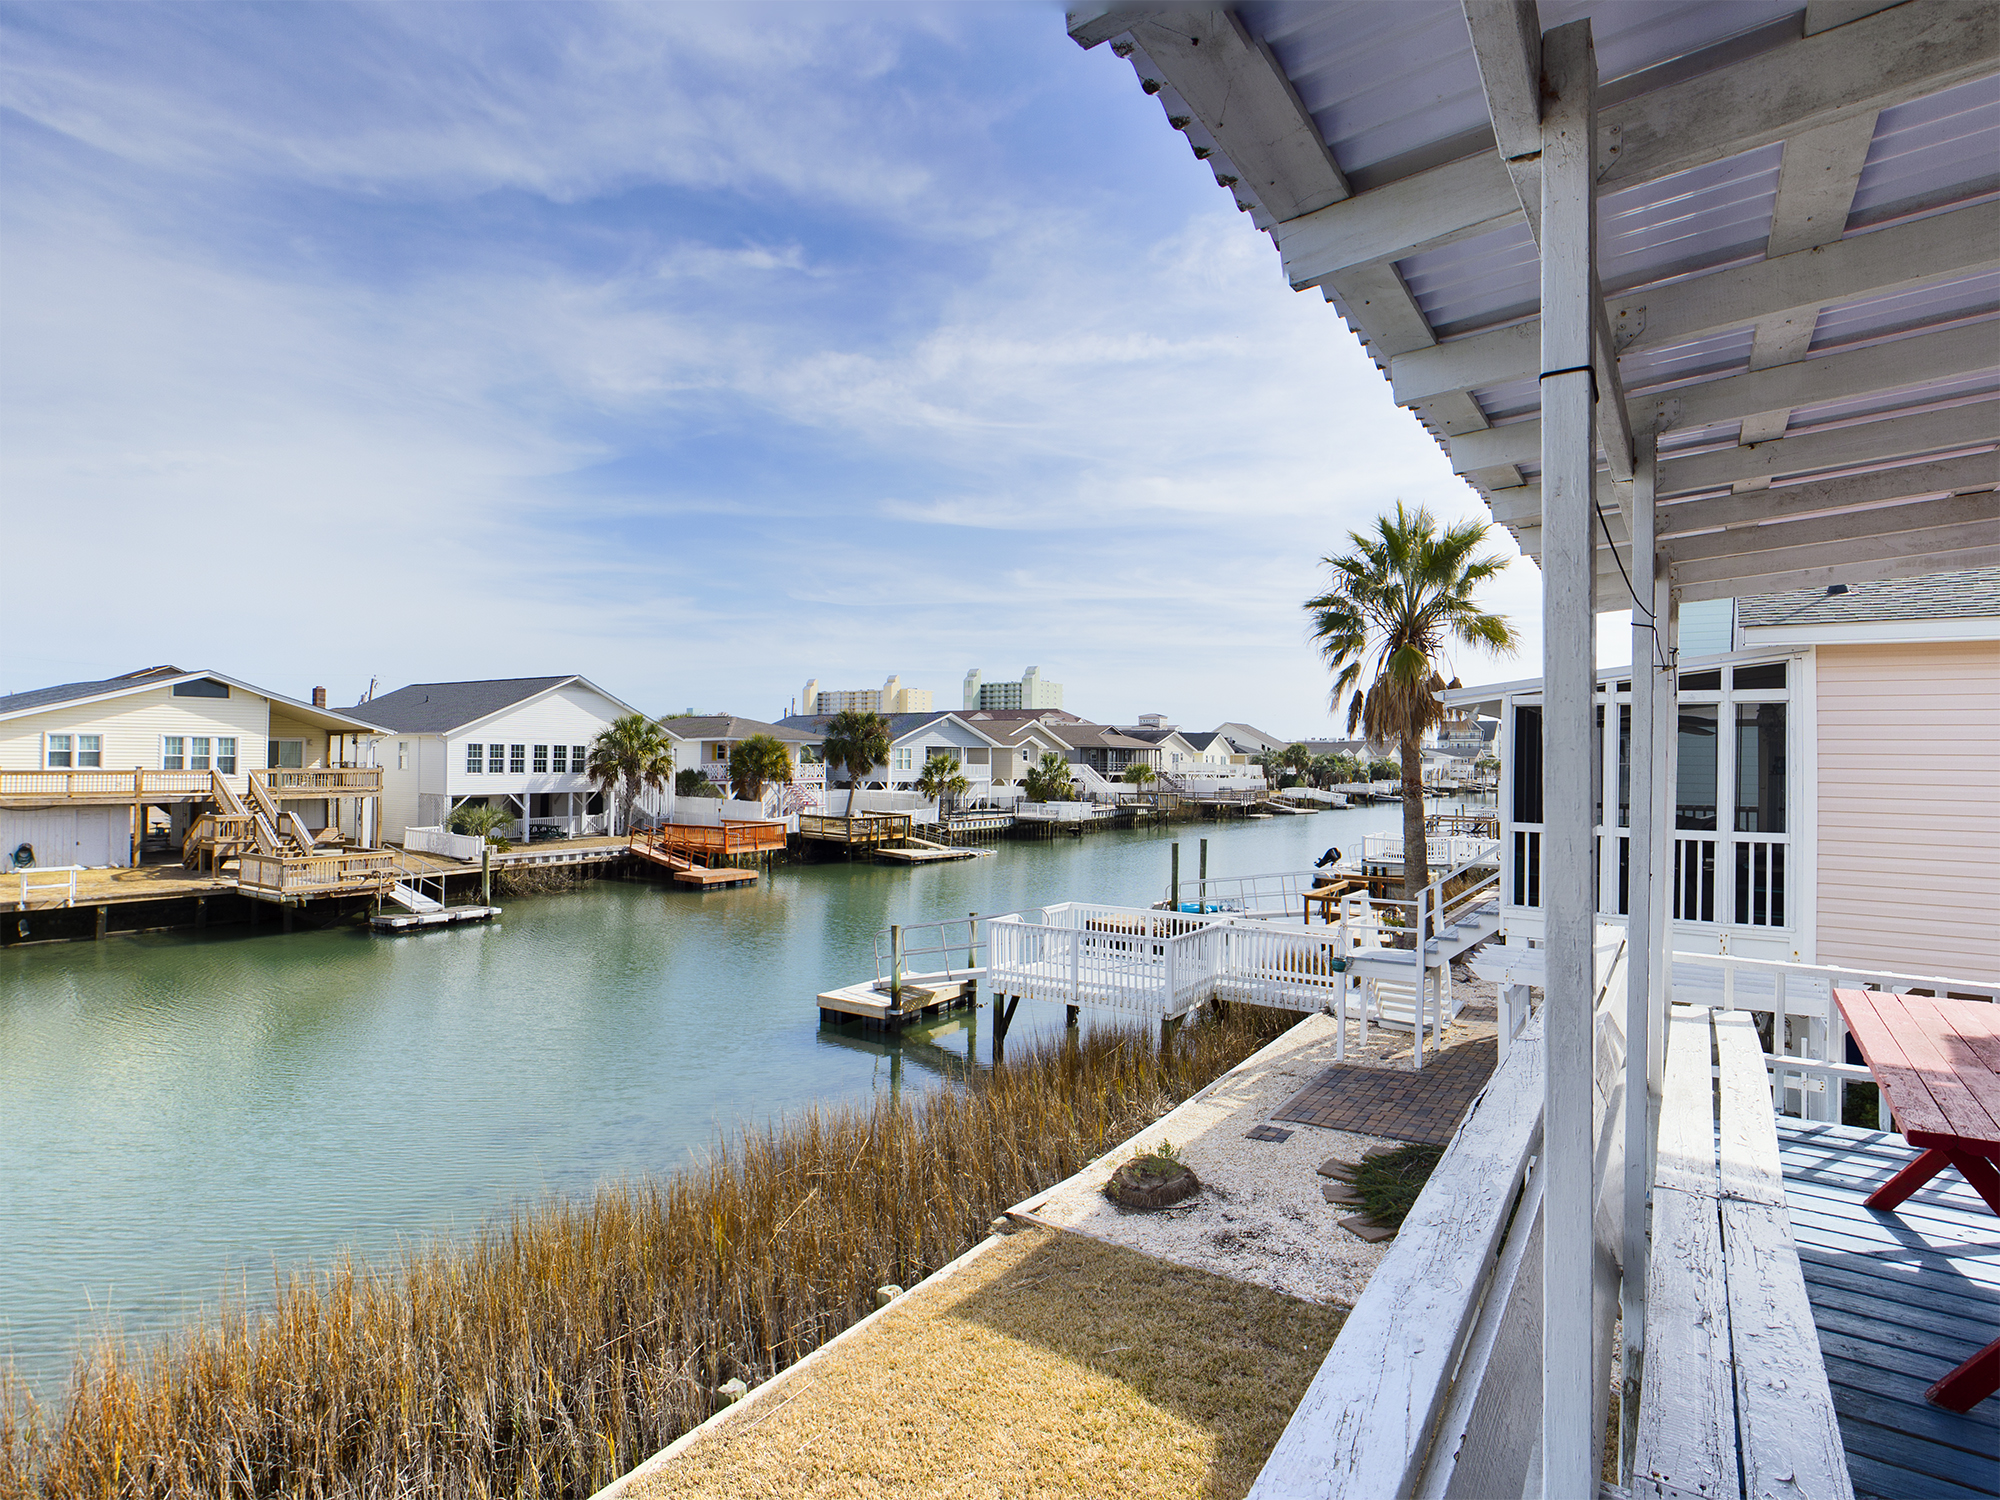 Bring Your Crew to Crew’s Nest – Channel Home in Cherry Grove